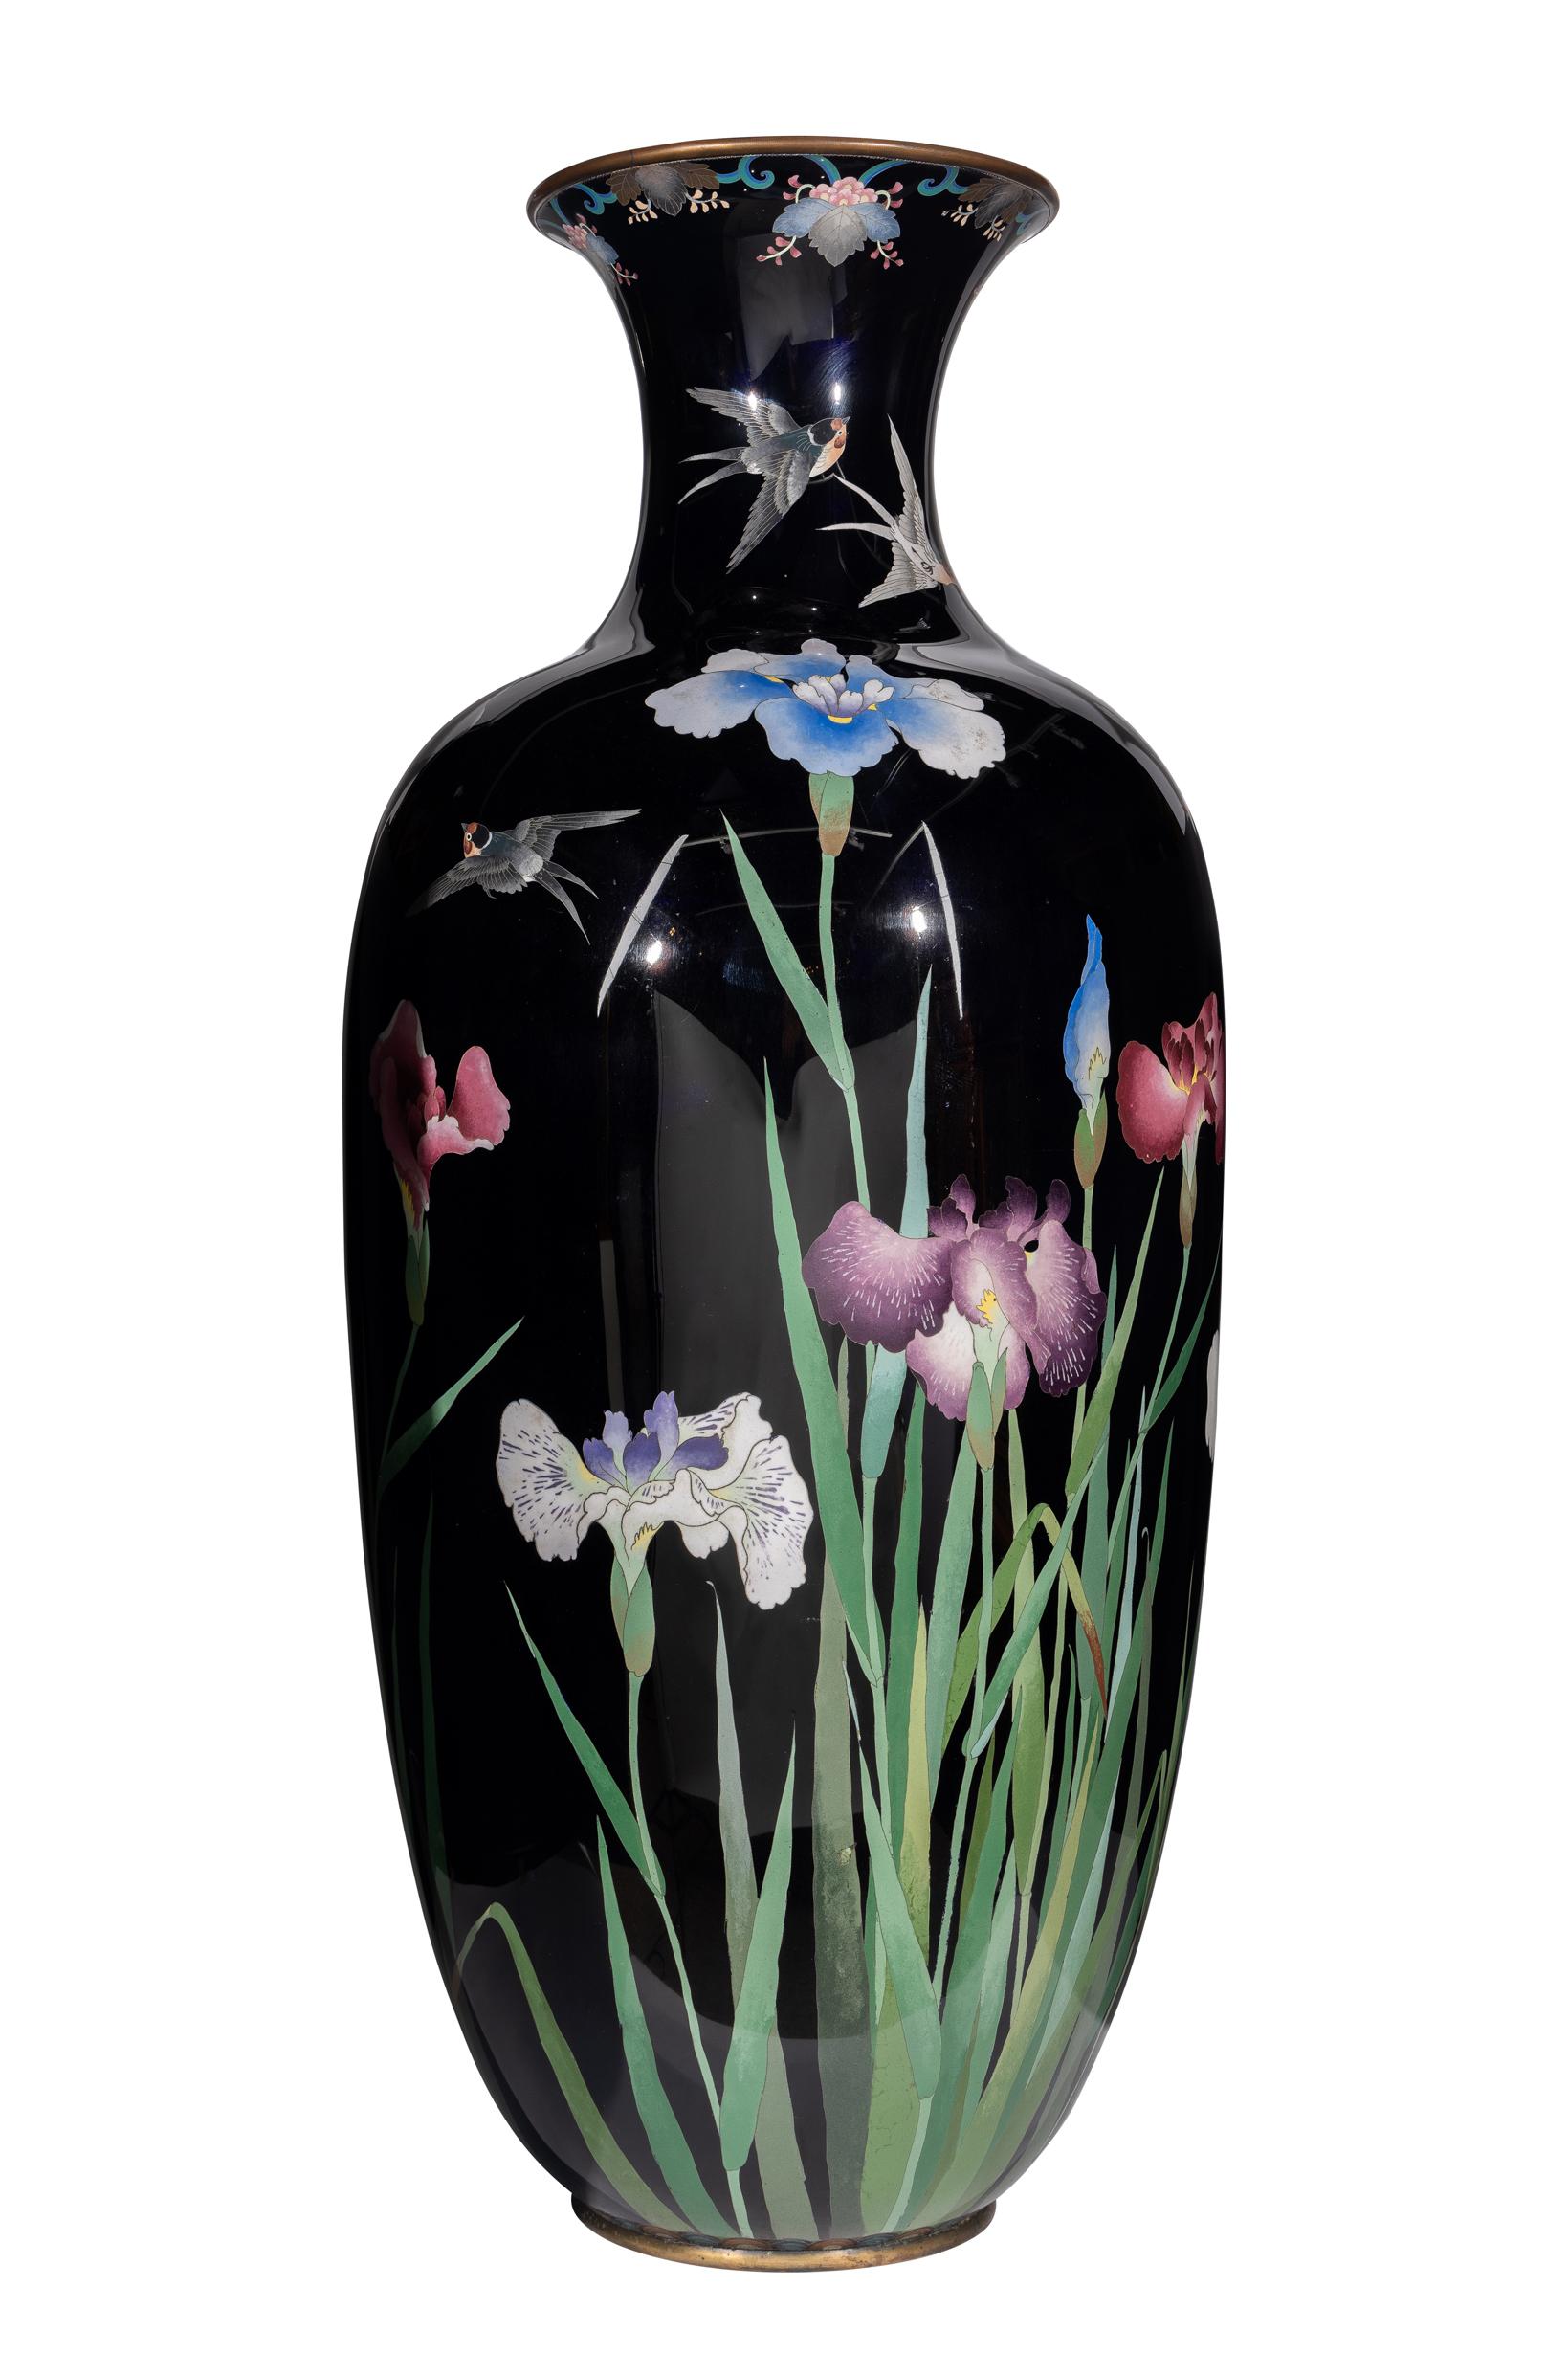 19th Century Palace-Sized Japanese Cloisonne Enamel Vase Adorned with Irises and Sparrows For Sale